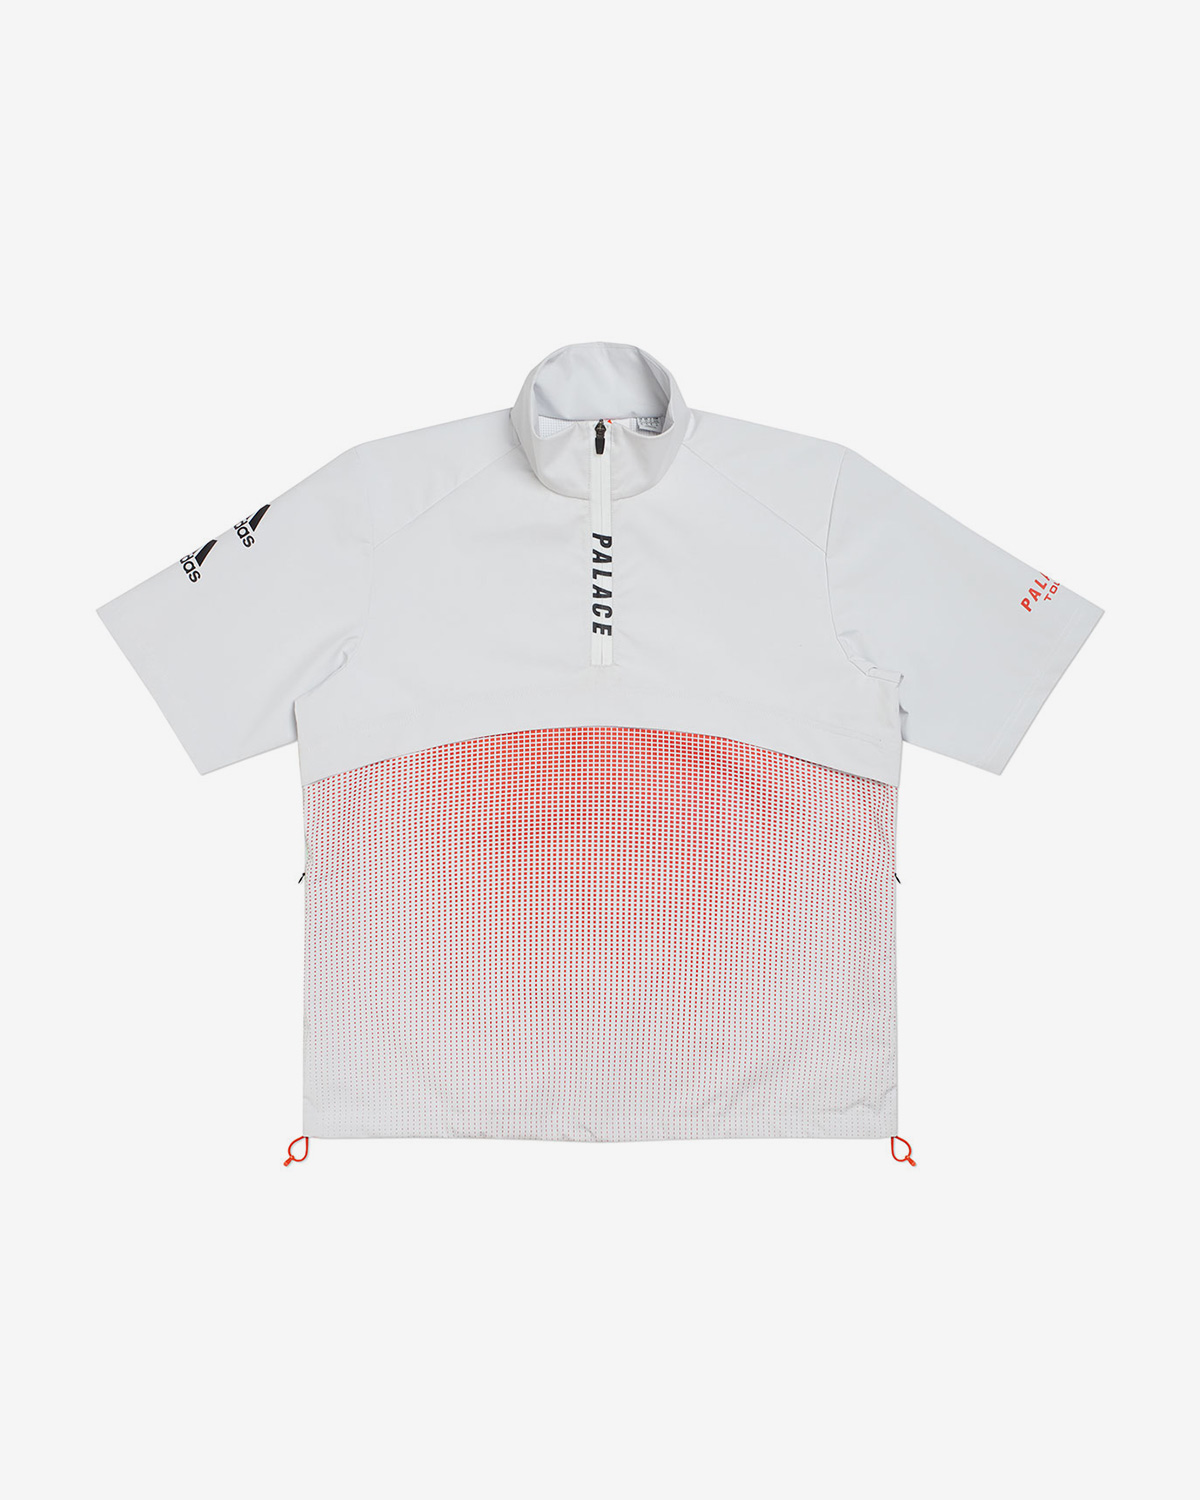 palace-adidas-golf-collaboration-official-look-06